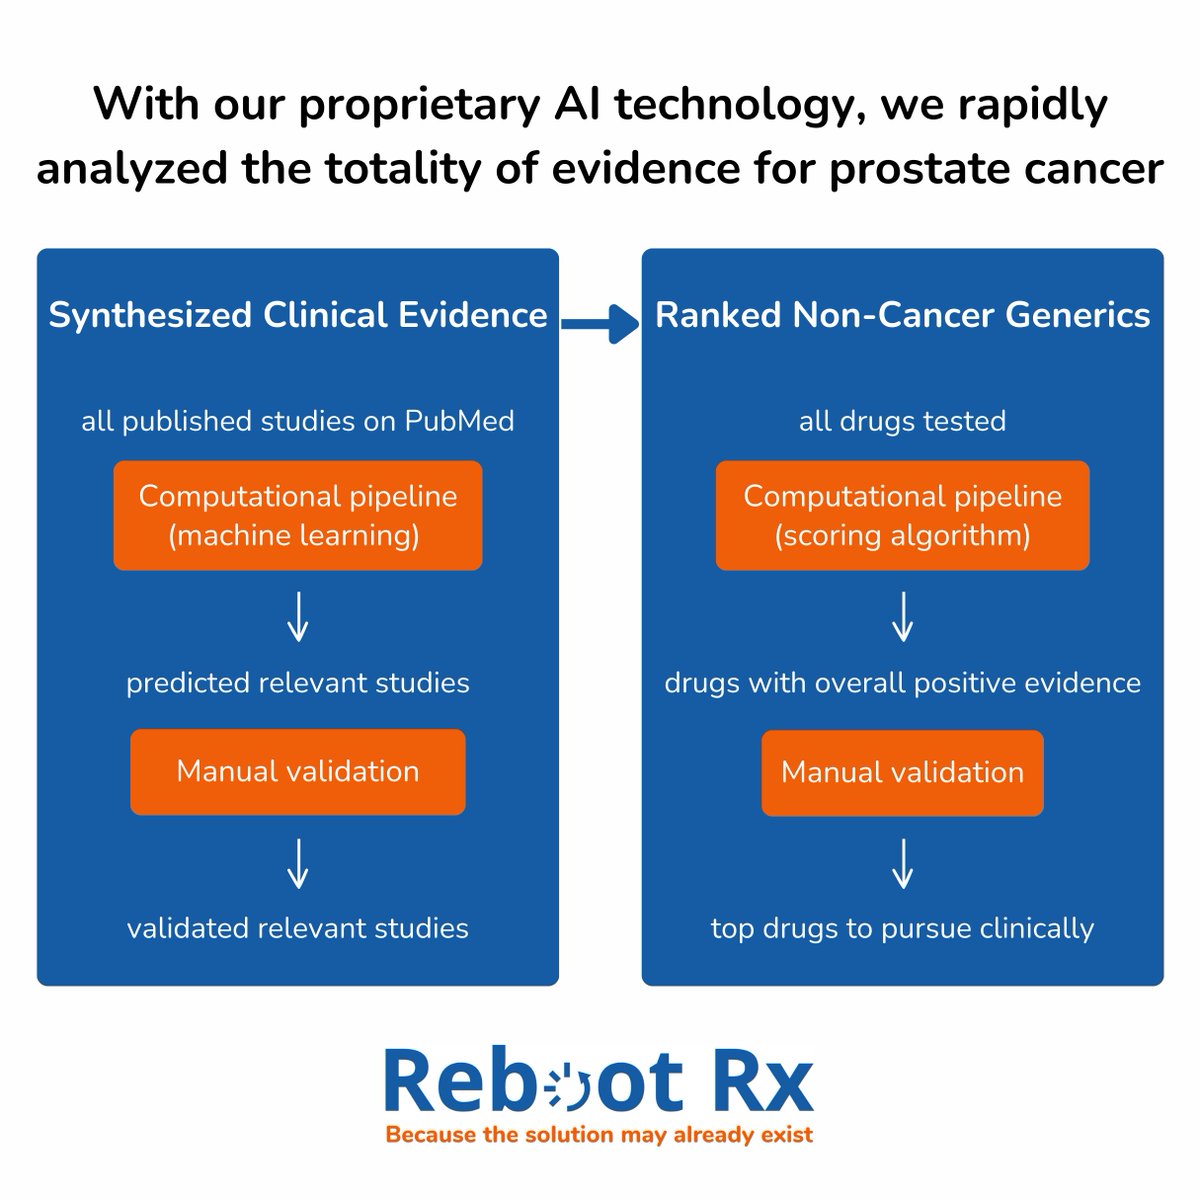 For our #prostatecancer project, we used our #AI tech to analyze data from 16K published studies and rank non-cancer generic drugs based on the totality of evidence. We found 80+ generics tested in at least one clinical study for prostate cancer. #ProstateCancerAwarenessMonth